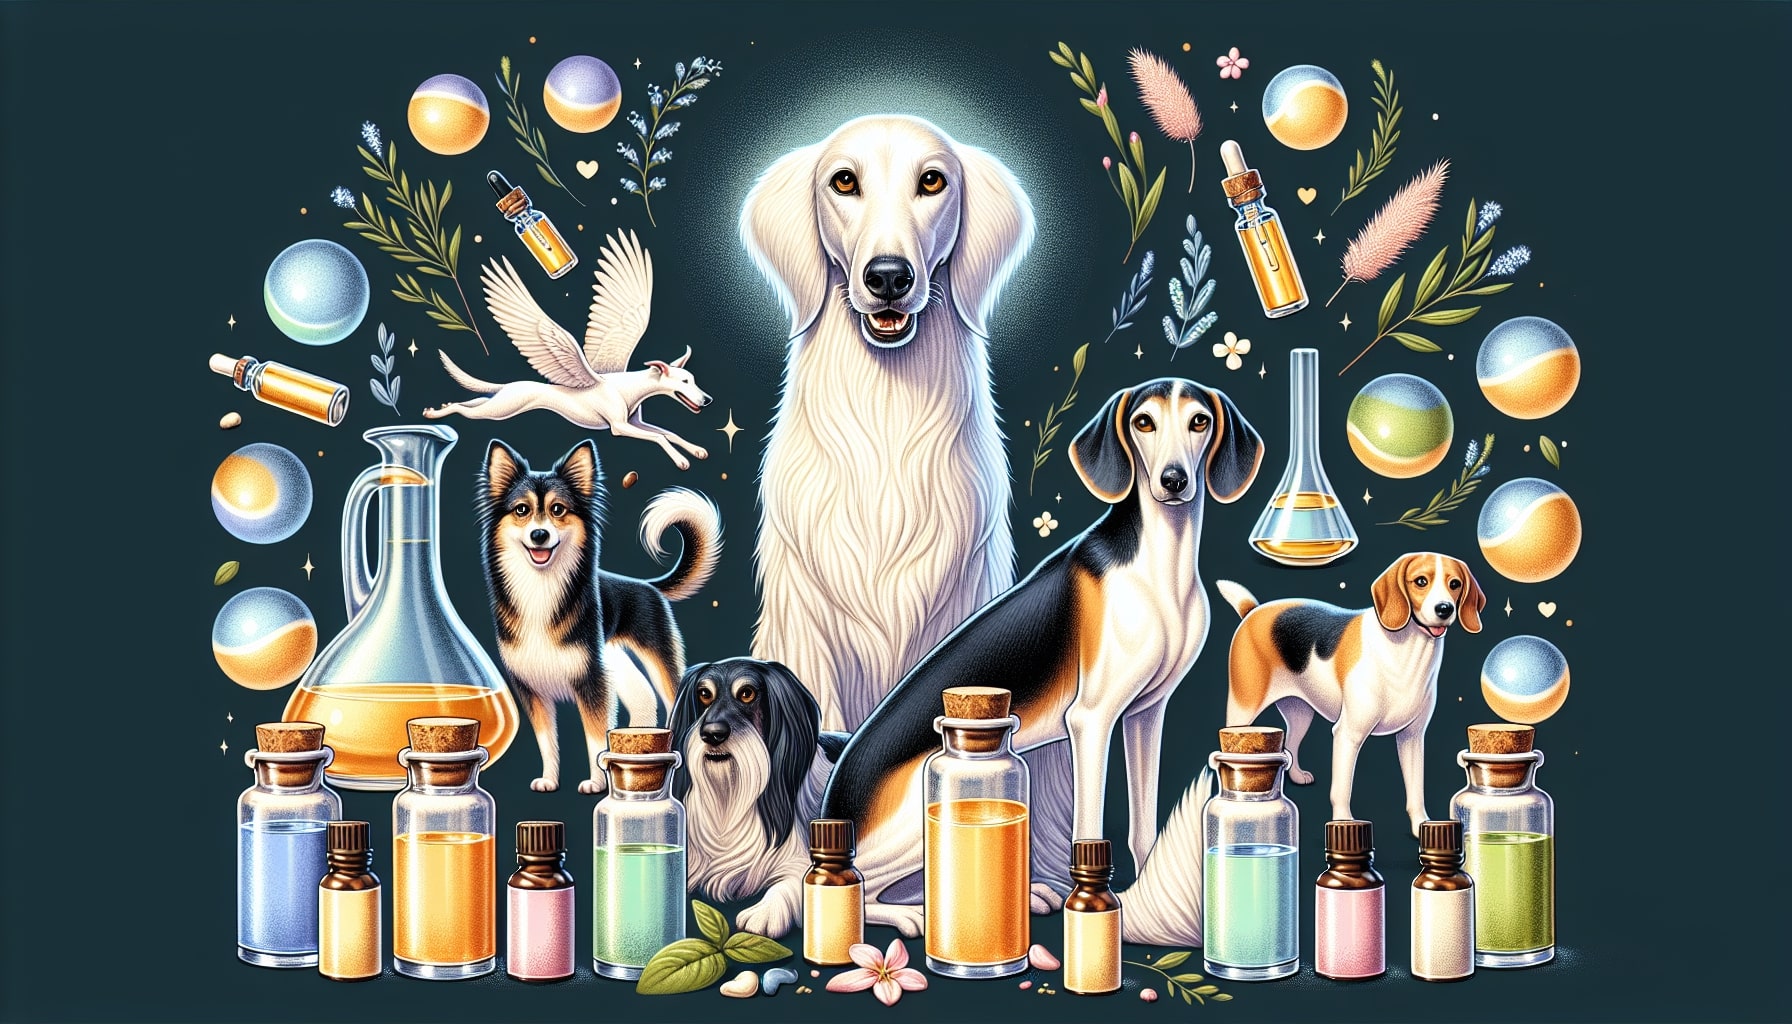 Fantasy dogs among magical potions and celestial orbs.